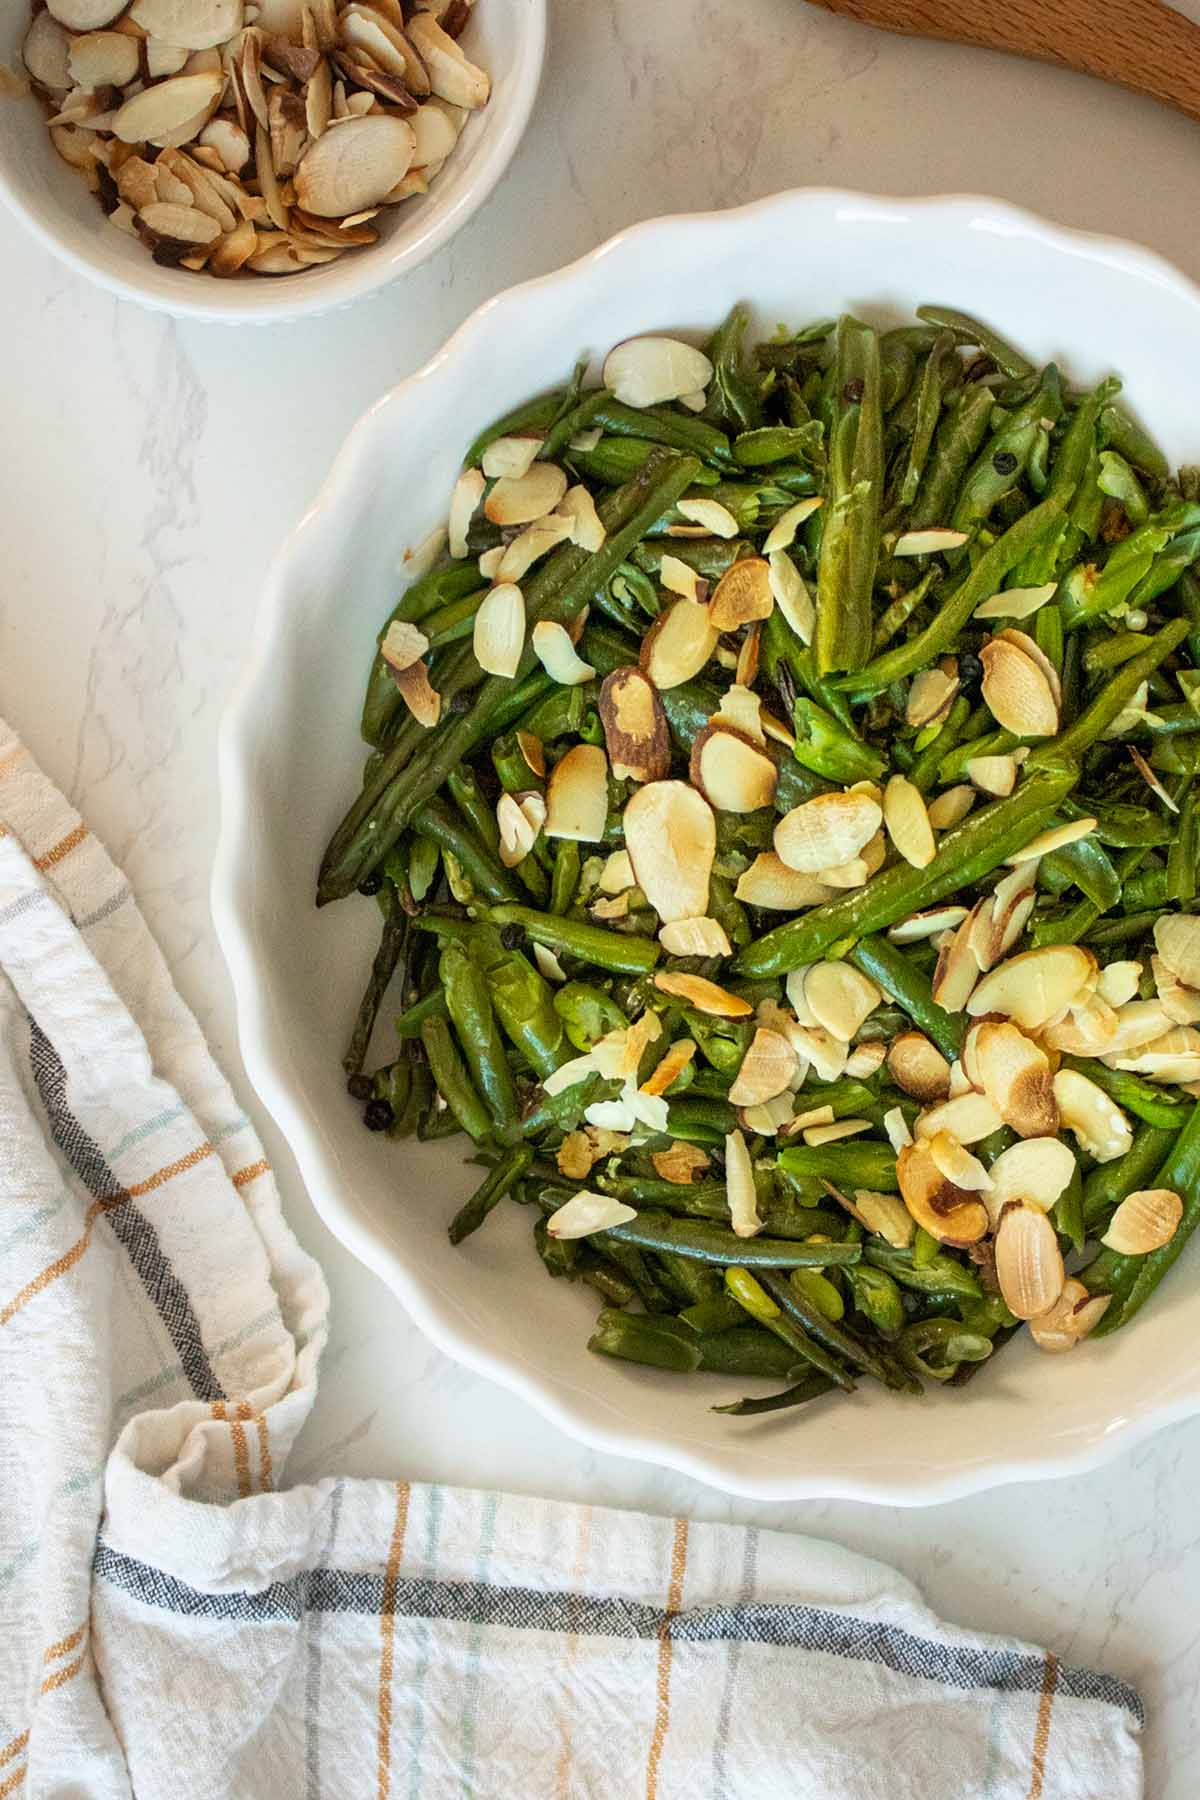 Cut Green Beans Frozen Nutrition Facts - Eat This Much